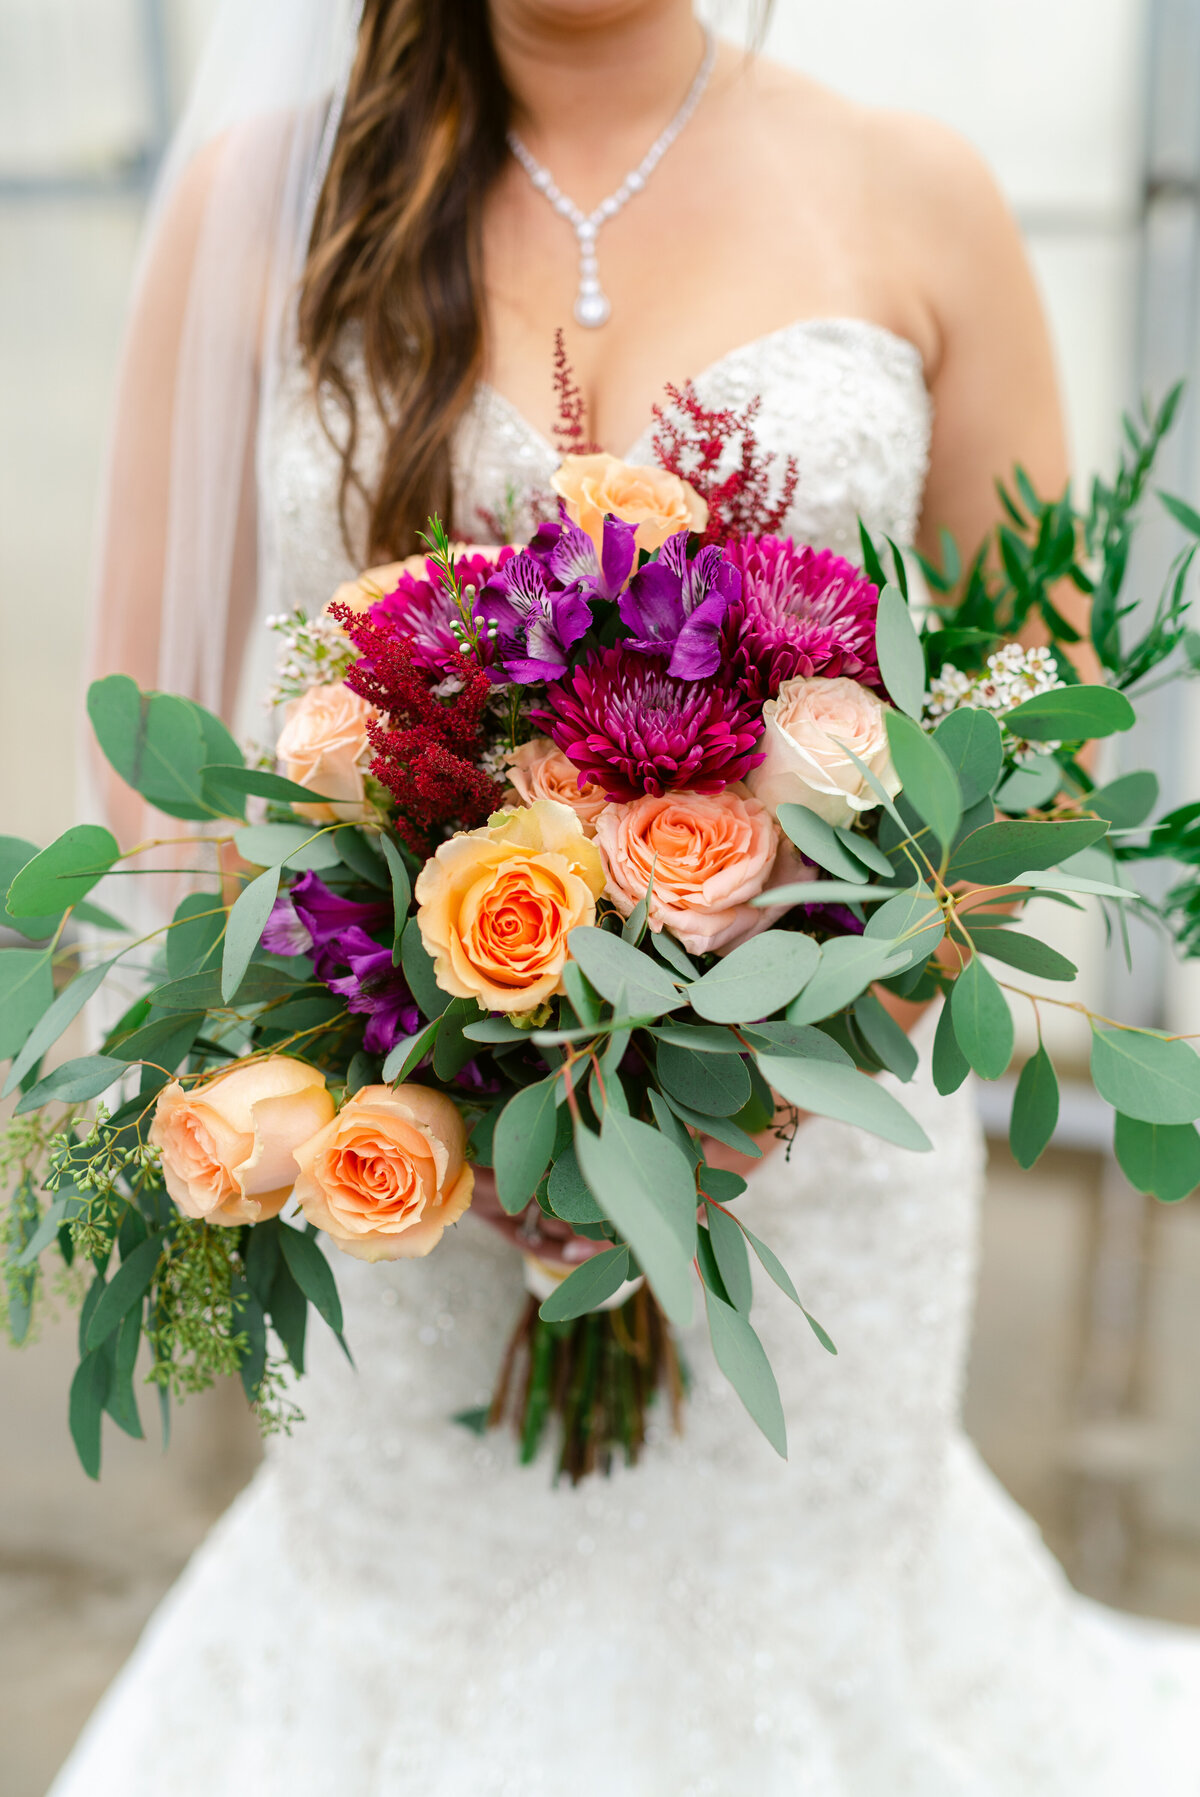 Bride holding a bright bouquet of flowers.